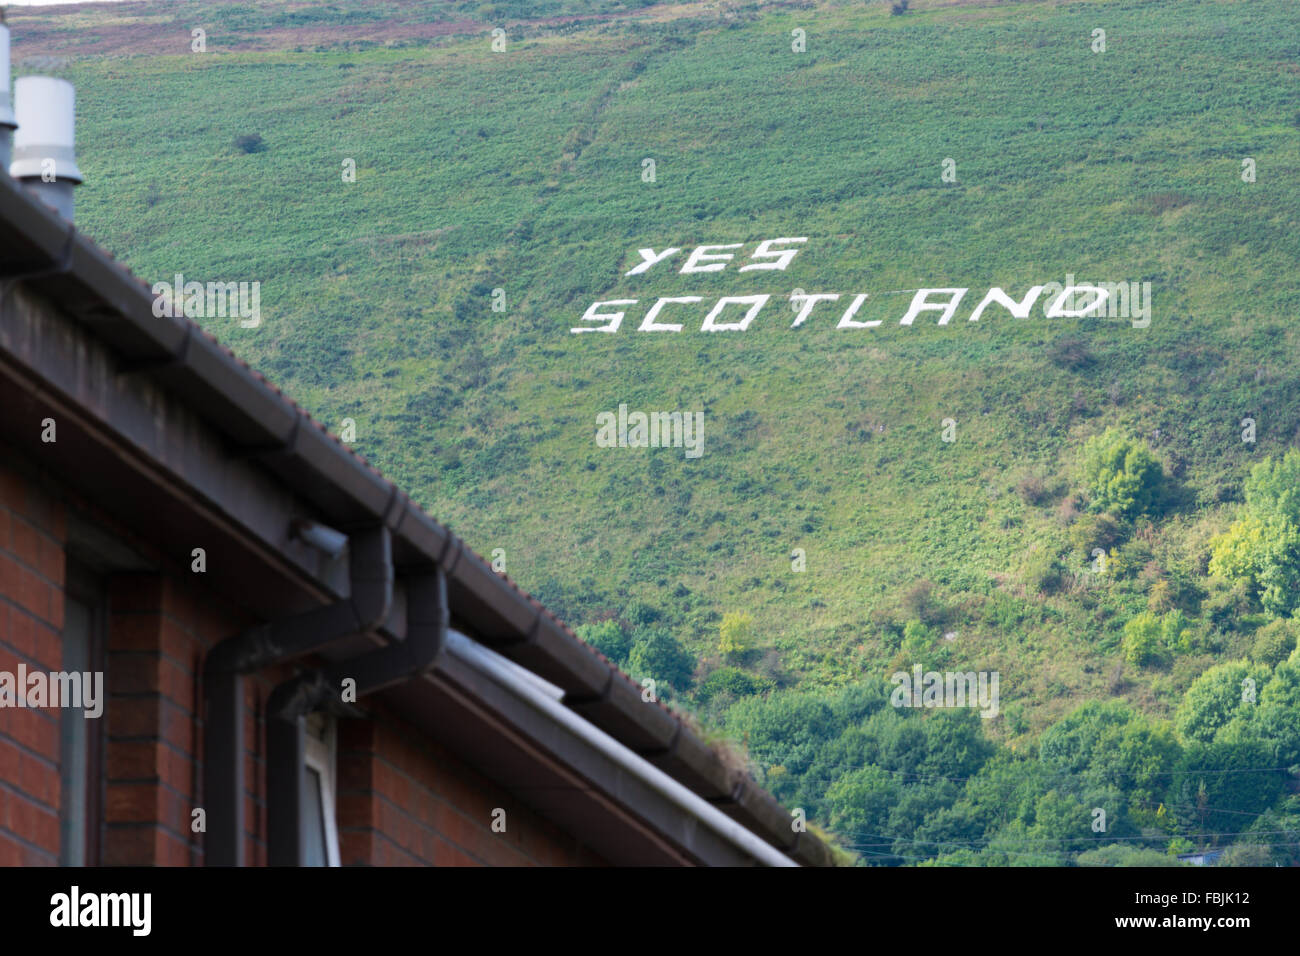 Large white Yes Scotland writing placed on Belfast's Black Mountain during Scotland's vote for independence from Britain Stock Photo